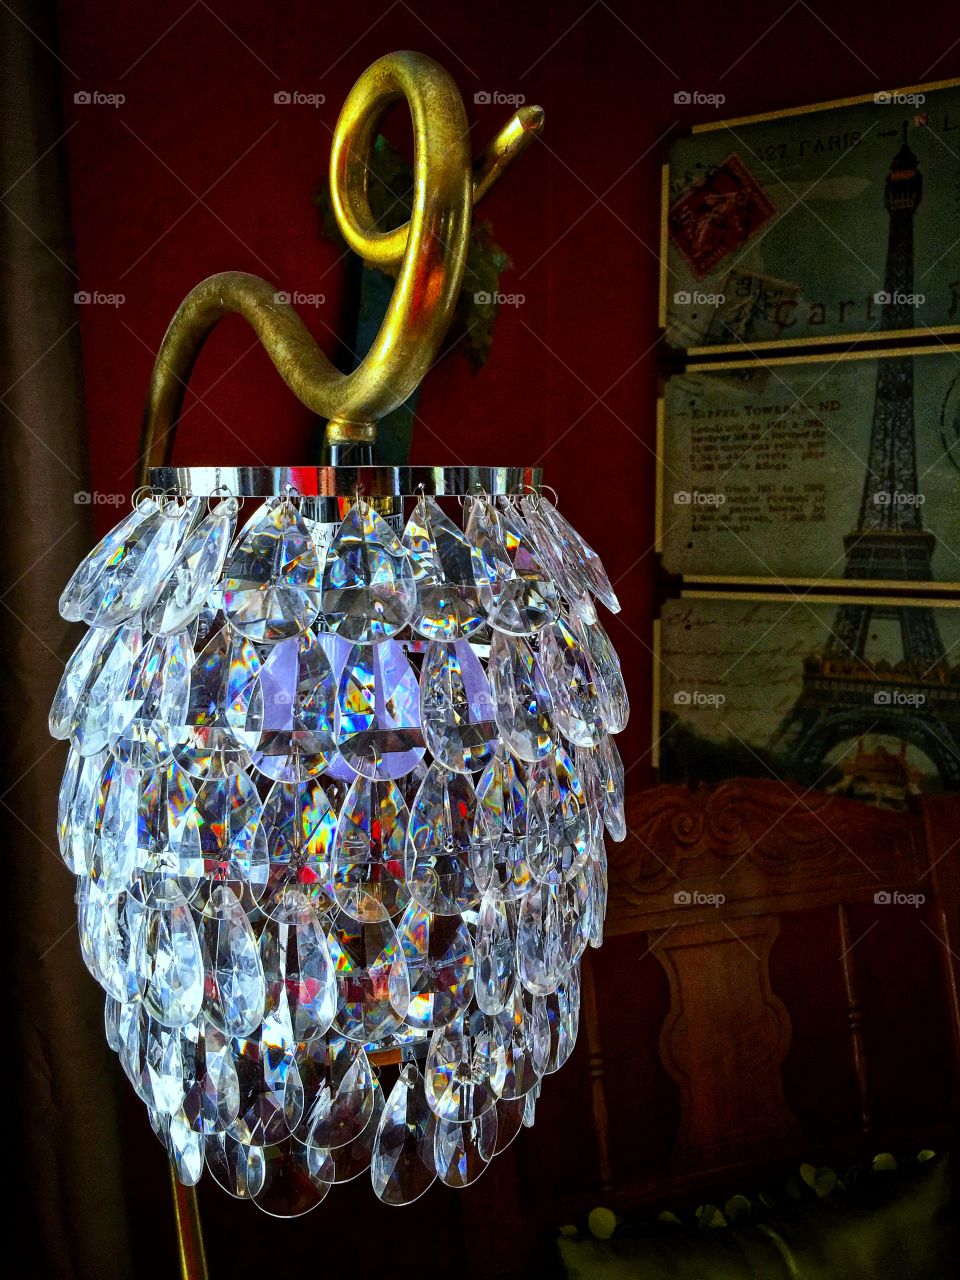 Crystal chandelier in the light.